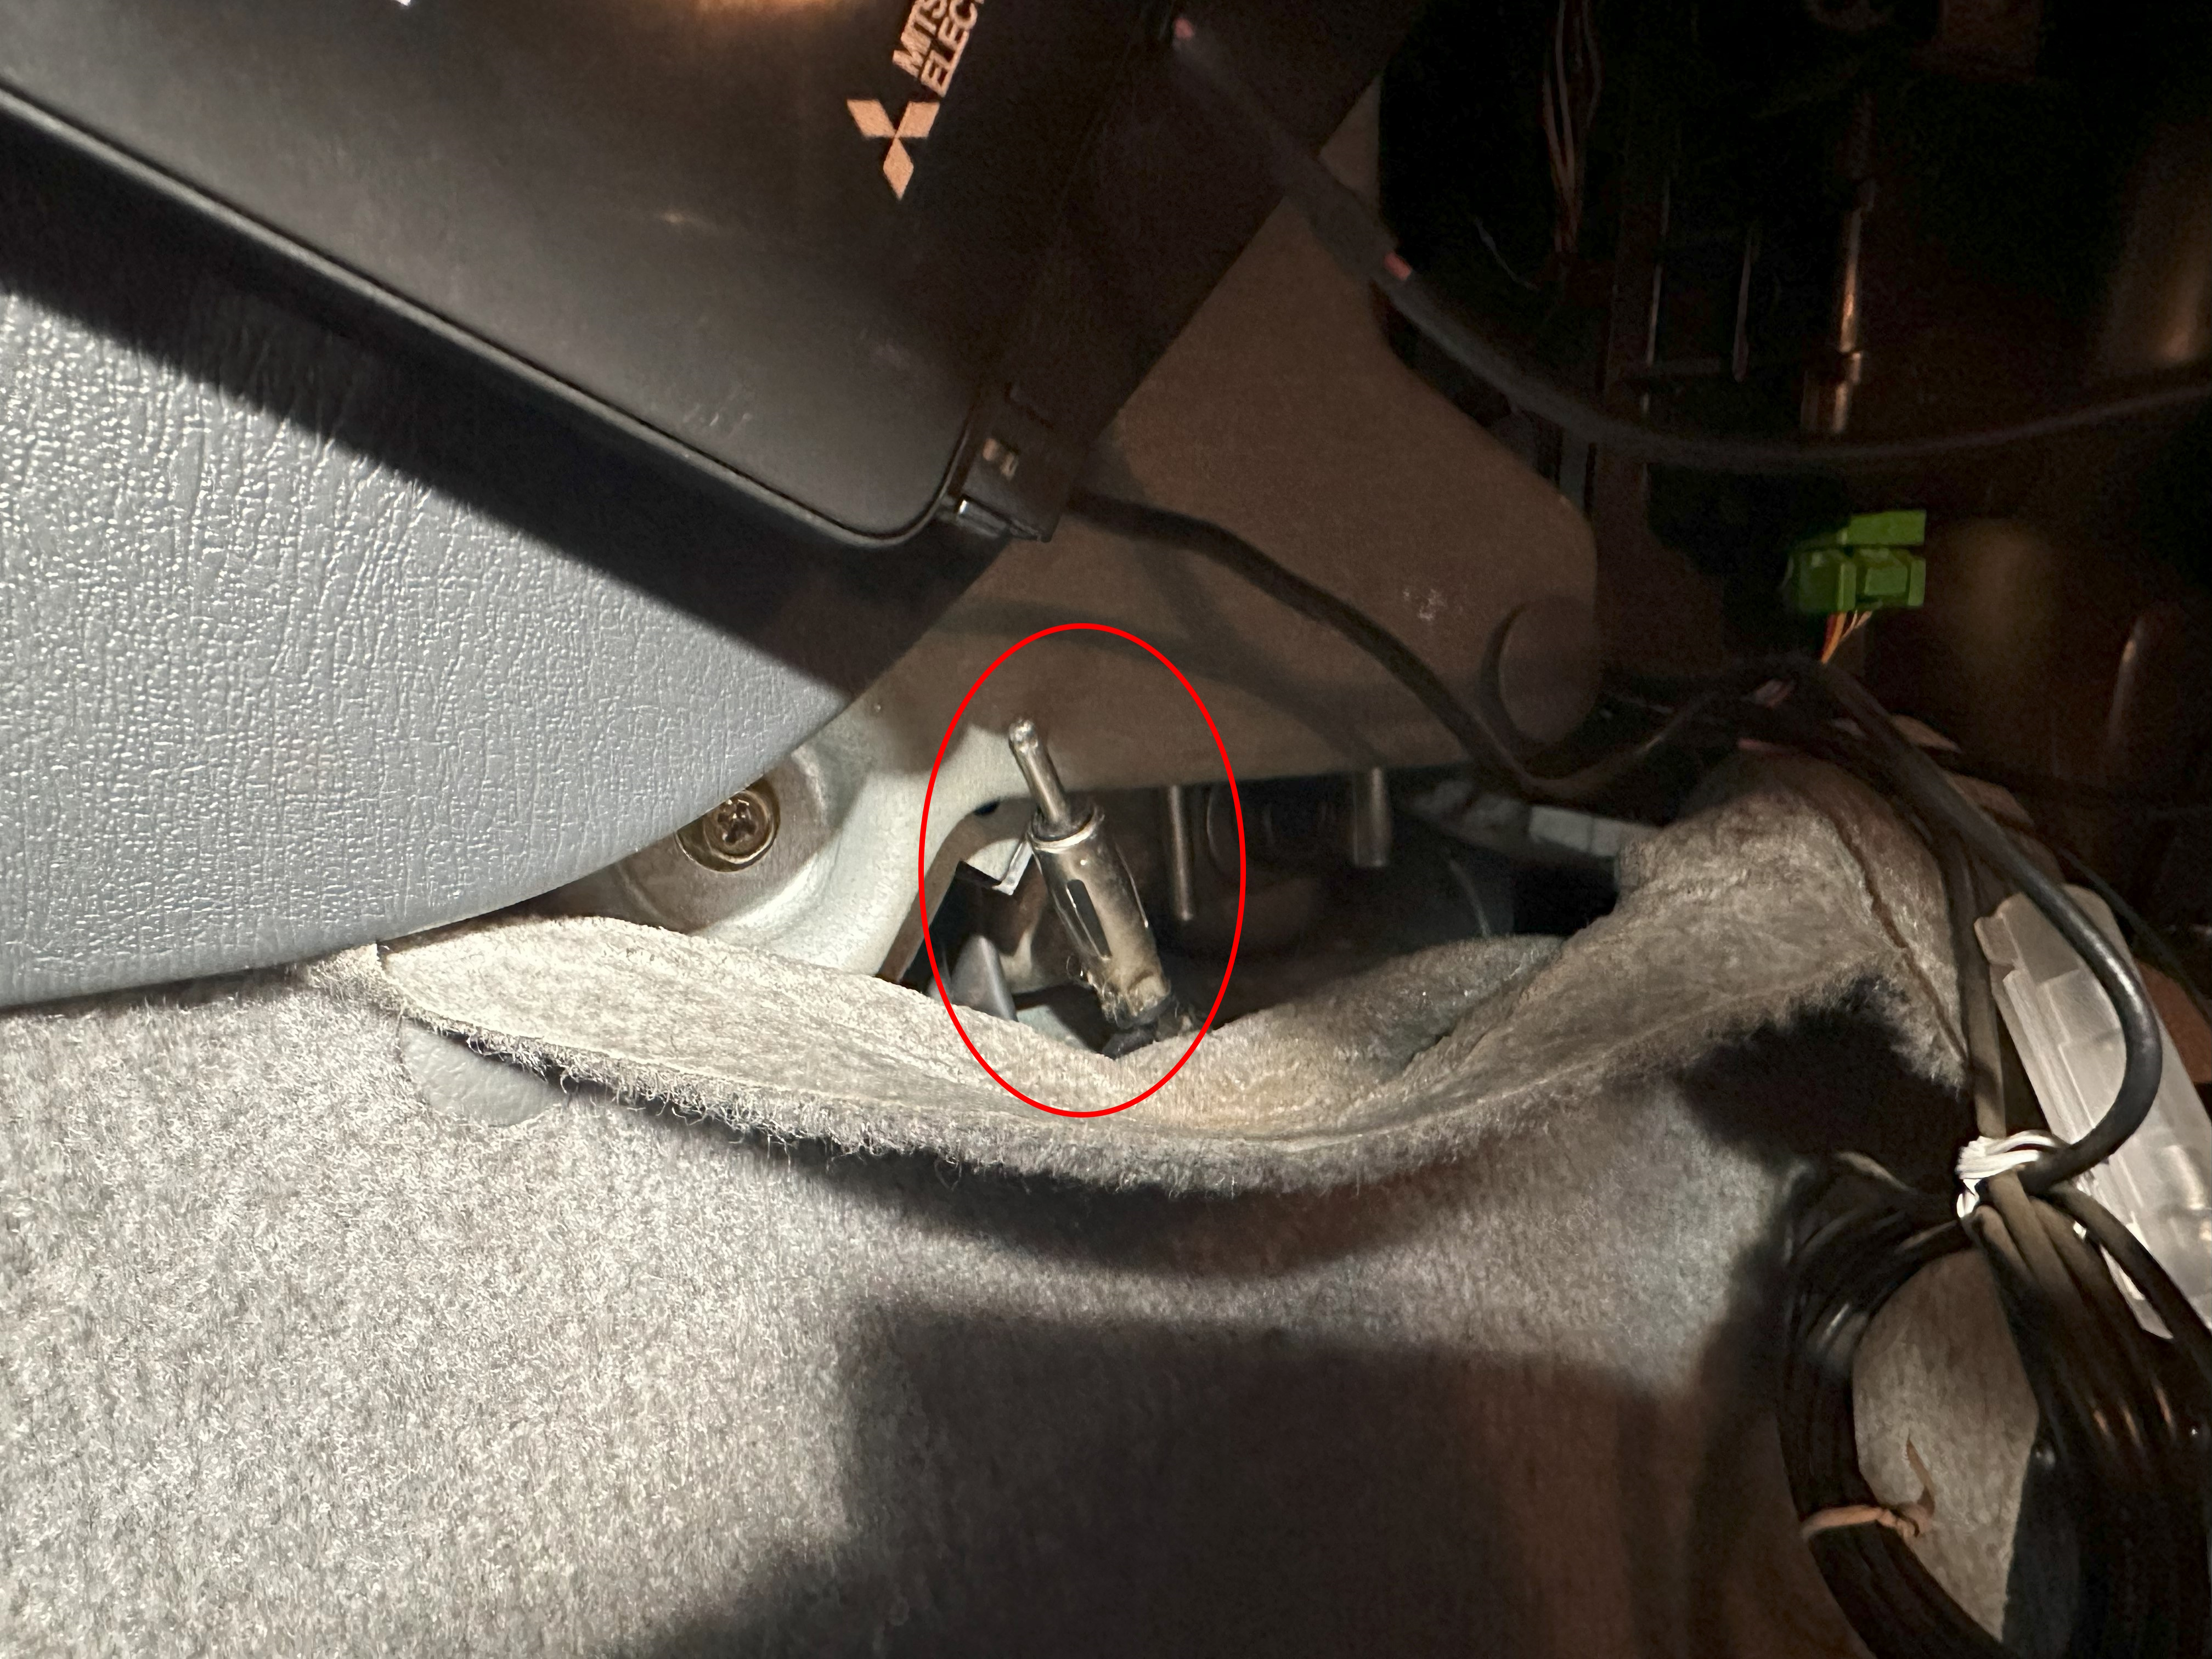 Picture of the antenna cable unplugged from the head unit and circled in red.